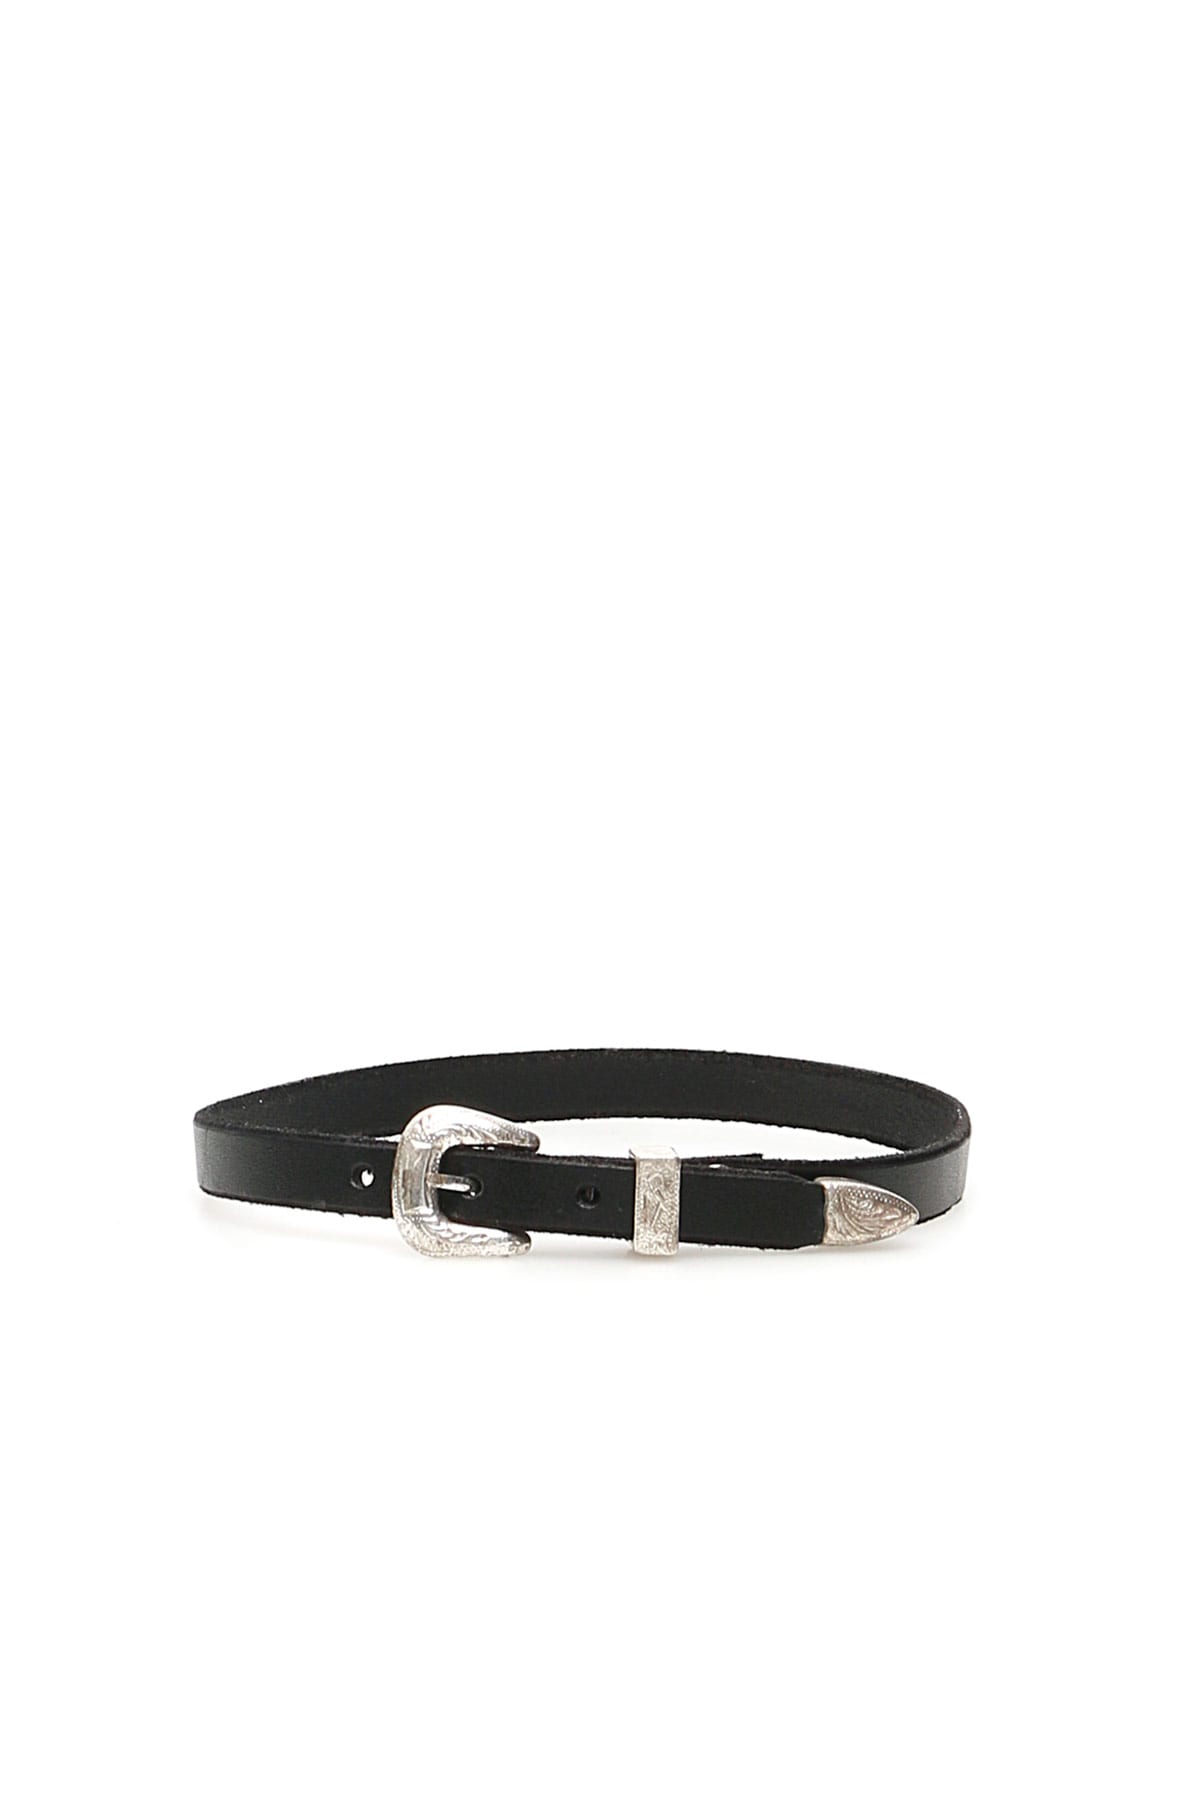 R13 LEATHER CHOKER NECKLACE,11235636